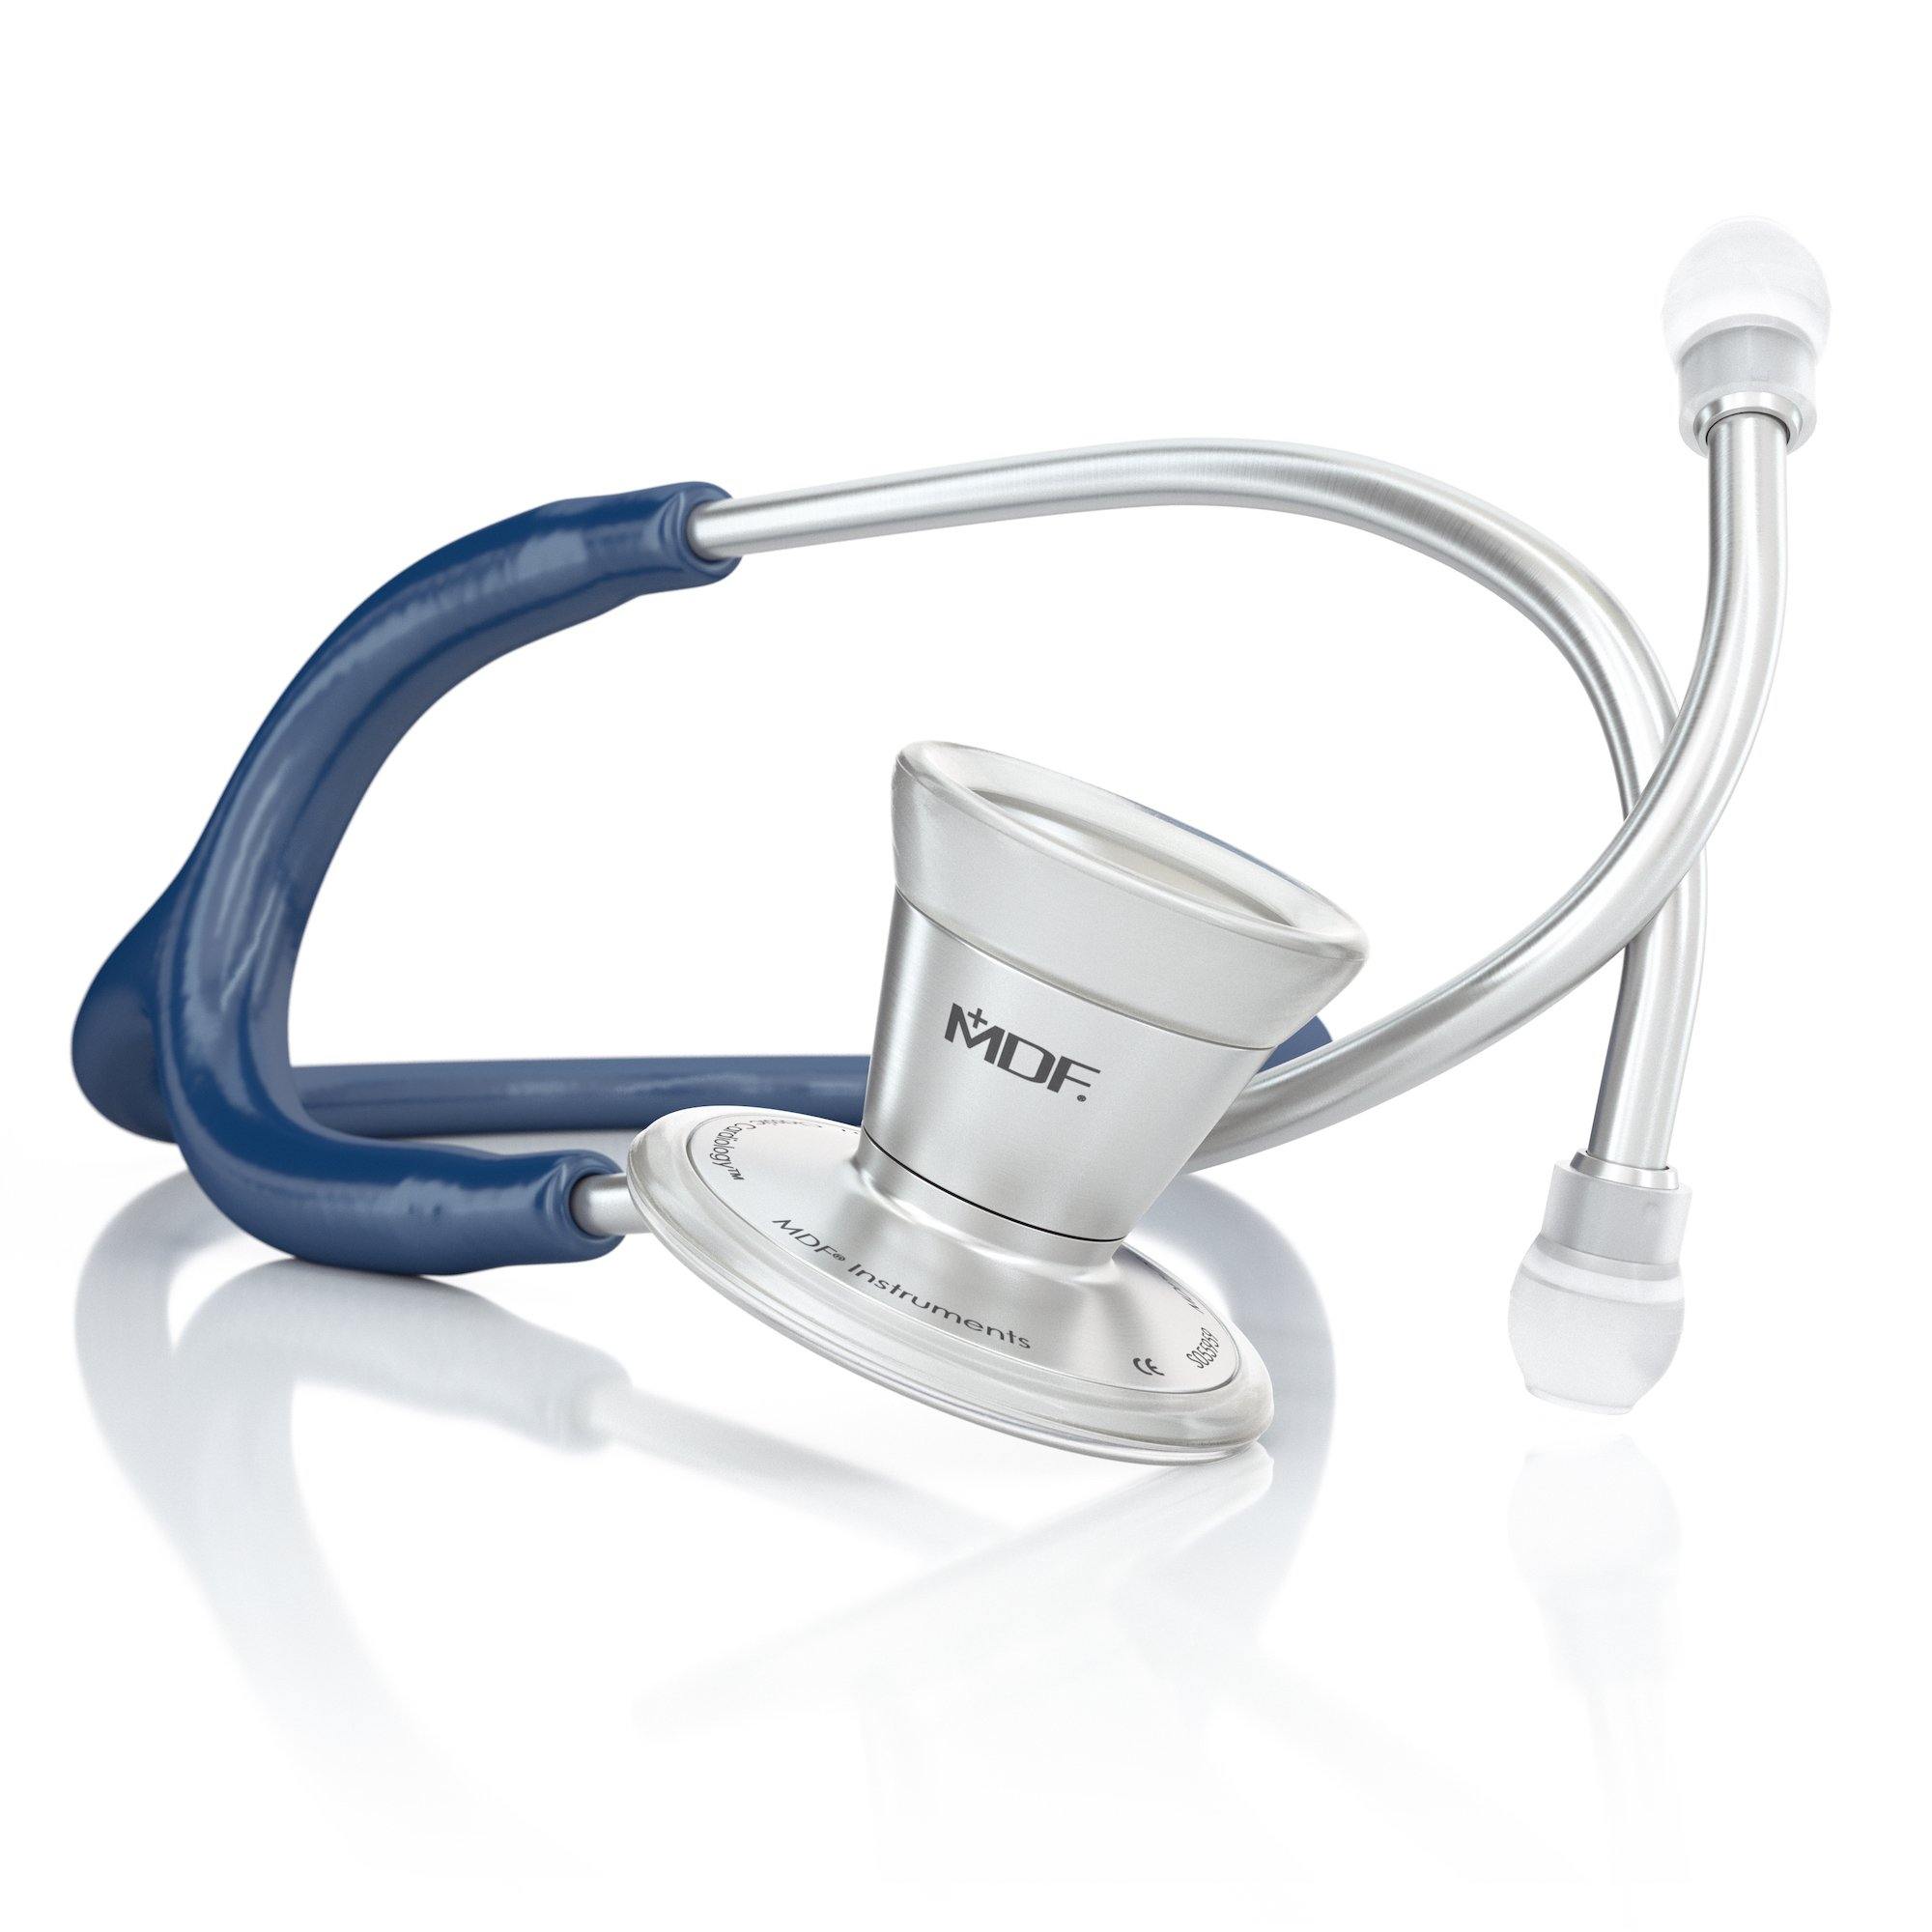 Greater Goods Dual-Head Stethoscope, Classic Design for Routine